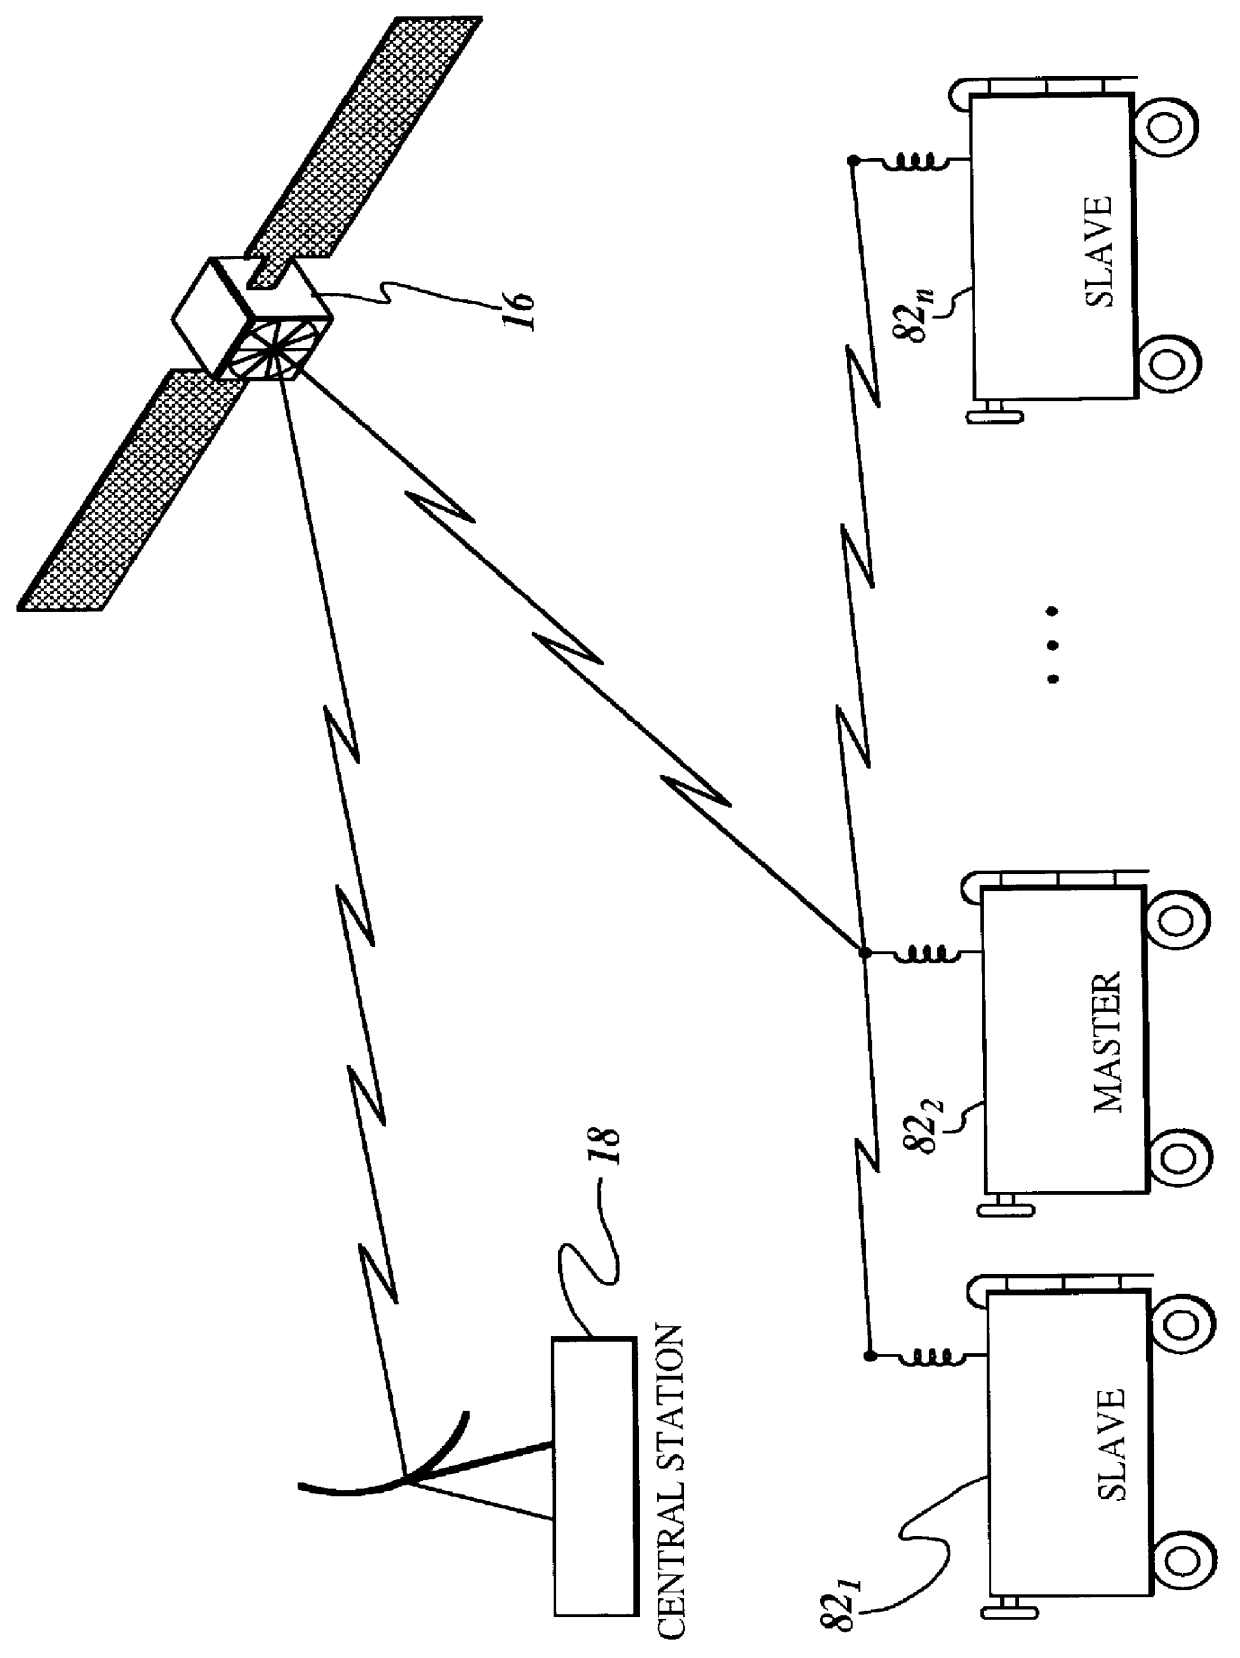 Inbound messaging transmission device and system for railcar asset tracking using high frequency signaling